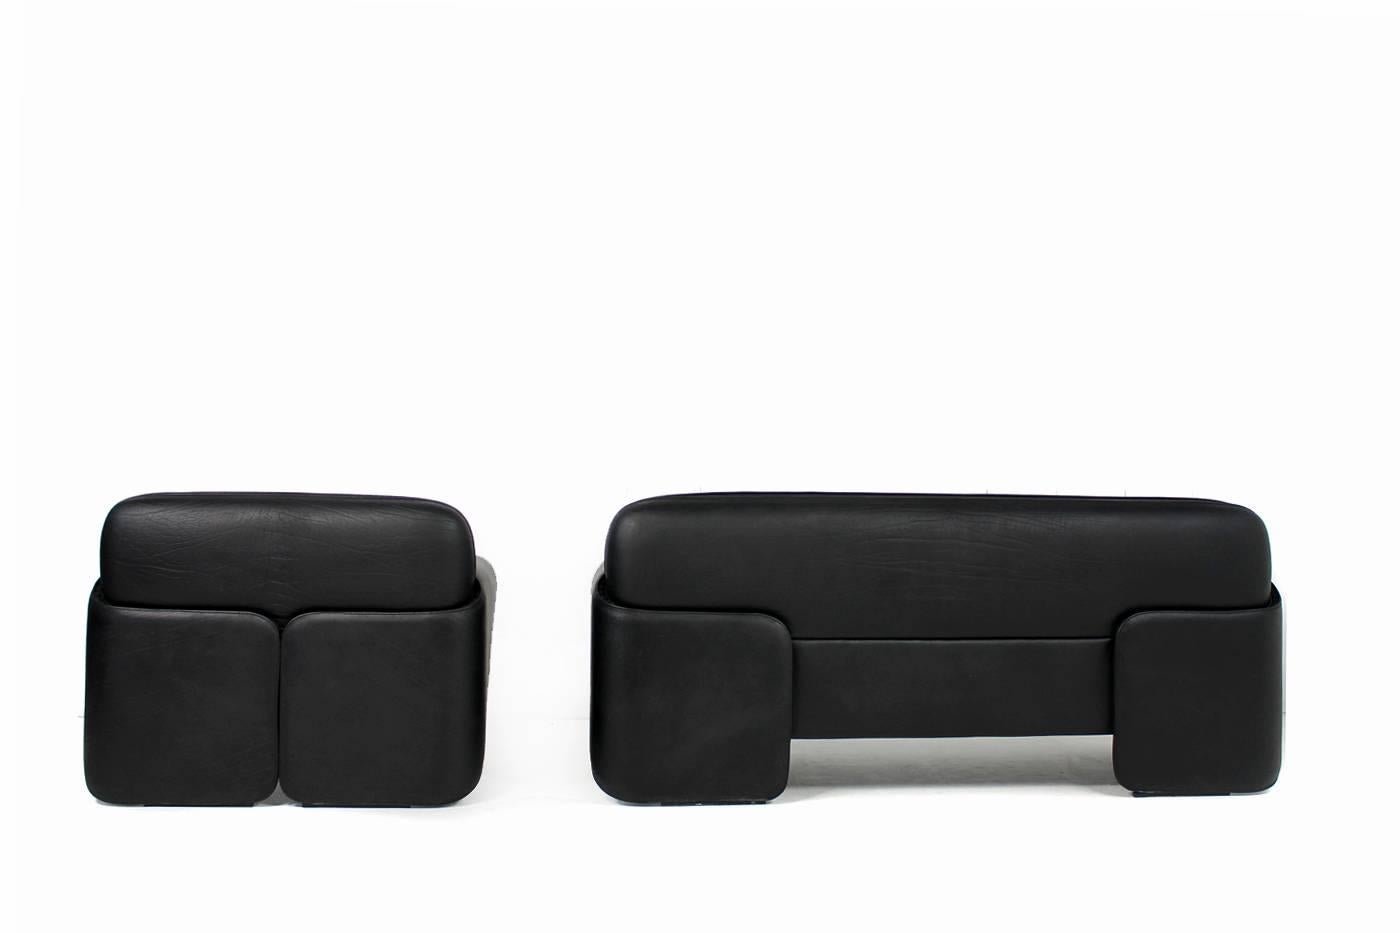 Beautiful and rare De Sede Set, Mod. DS 125.
Design: Gerd Lange for De Sede Switzerland 1978.
3-seat Sofa and Lounge Chair in black and very thick leather circa. 3-5mm. The leather was renewed professionally. Powerful black color, beautiful